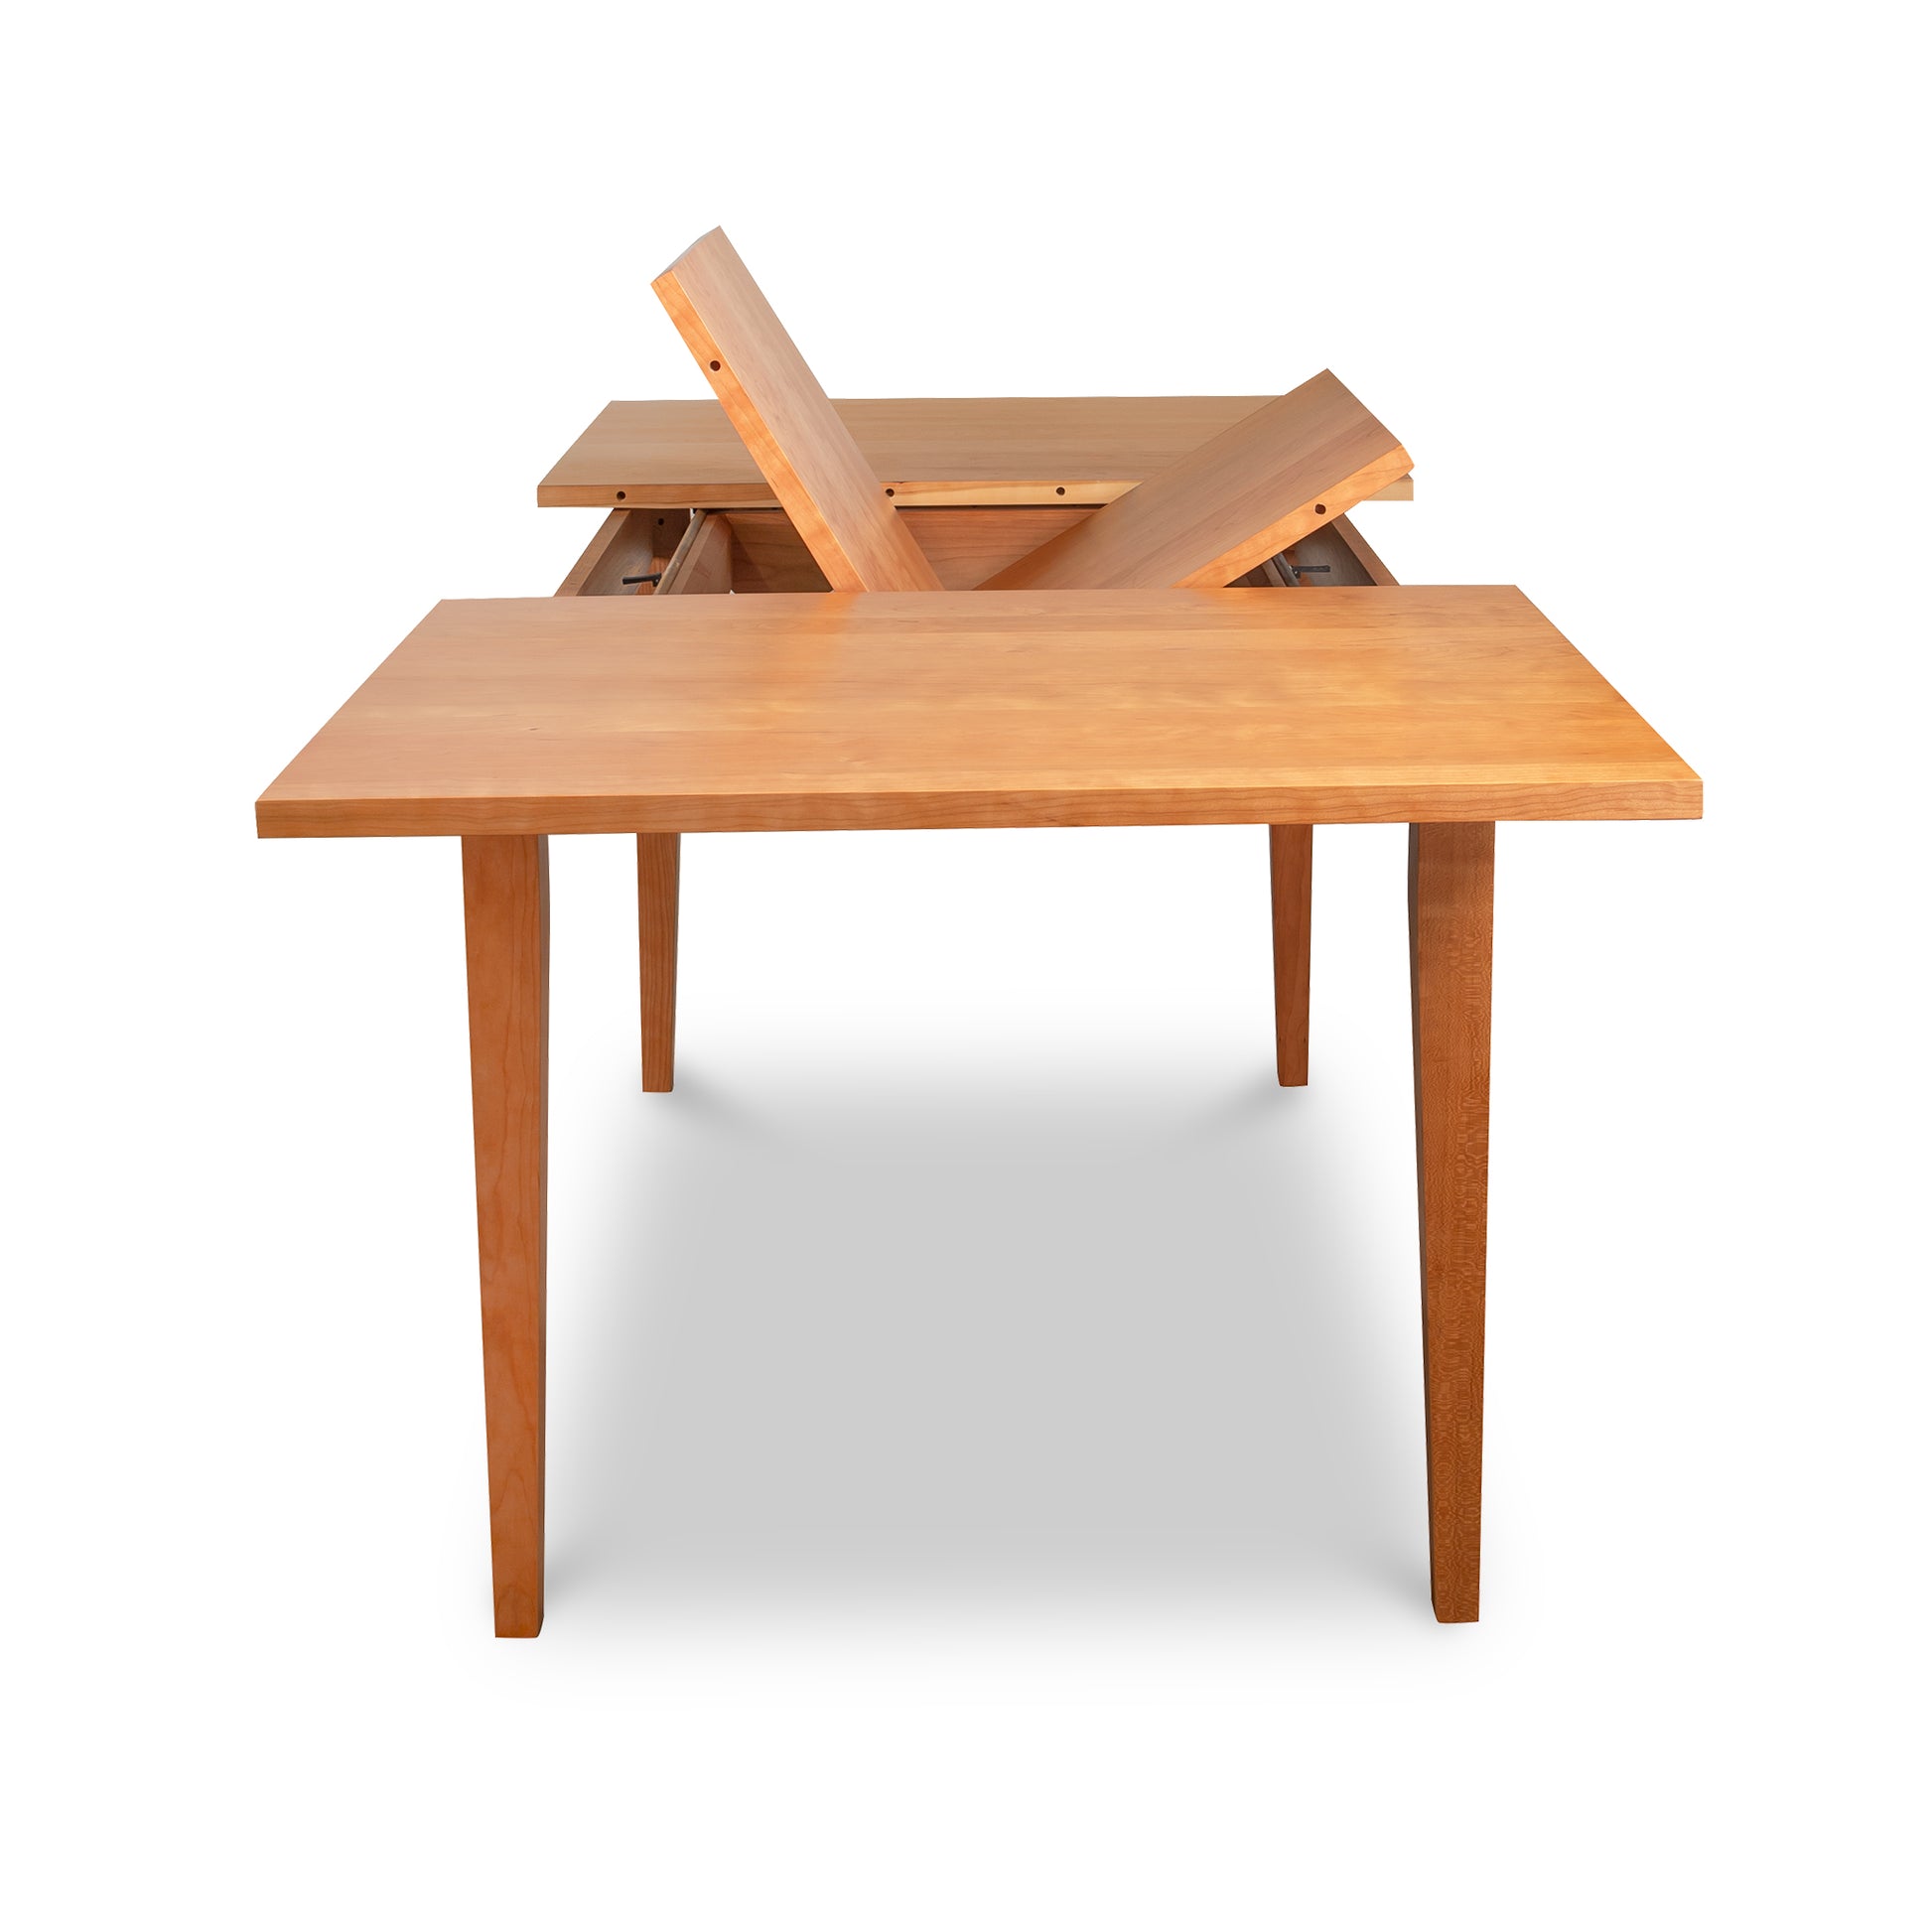 A handcrafted, natural cherry, mid-century modern Classic Shaker Butterfly Extension Table - Floor Model with a folding top by Lyndon Furniture.